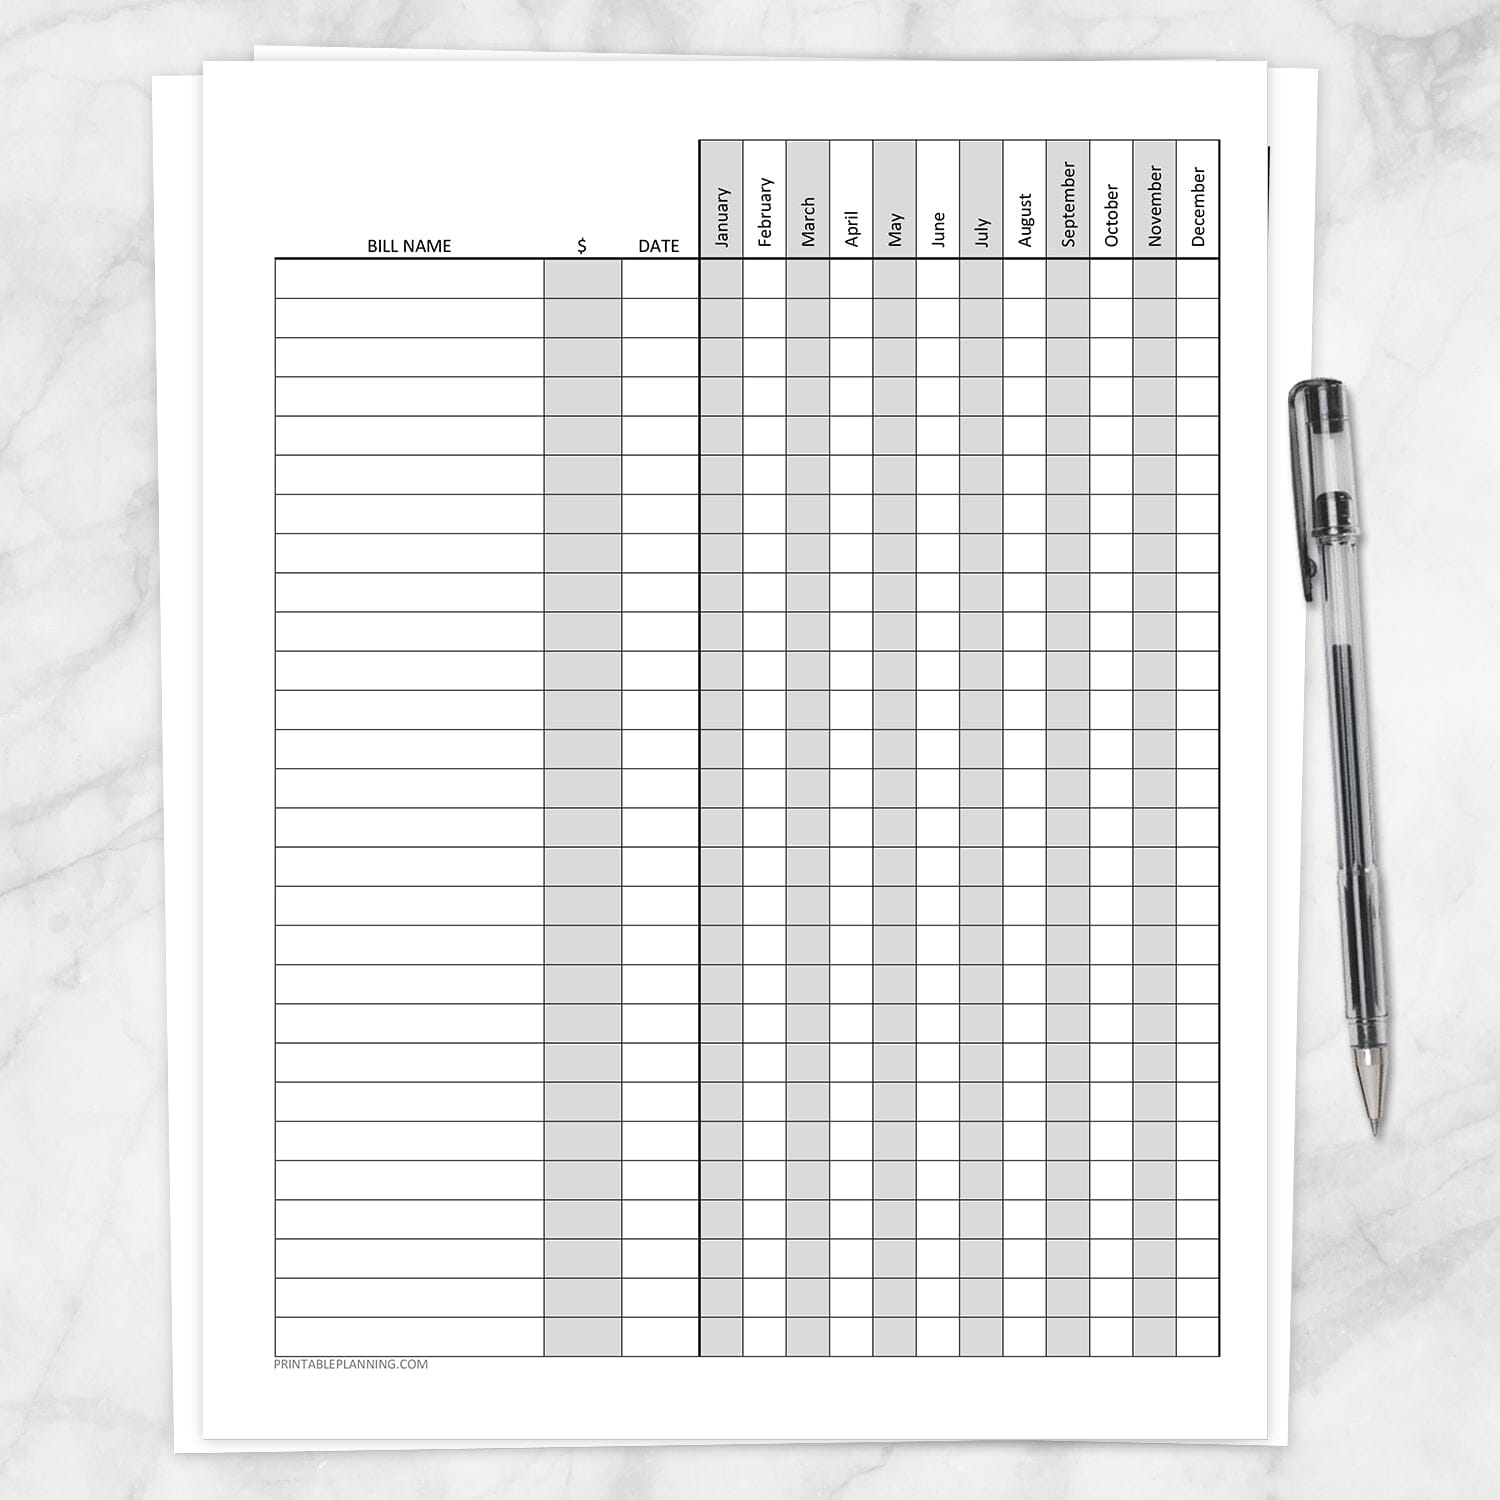 Printable Monthly Bill Payment Tracker at Printable Planning.